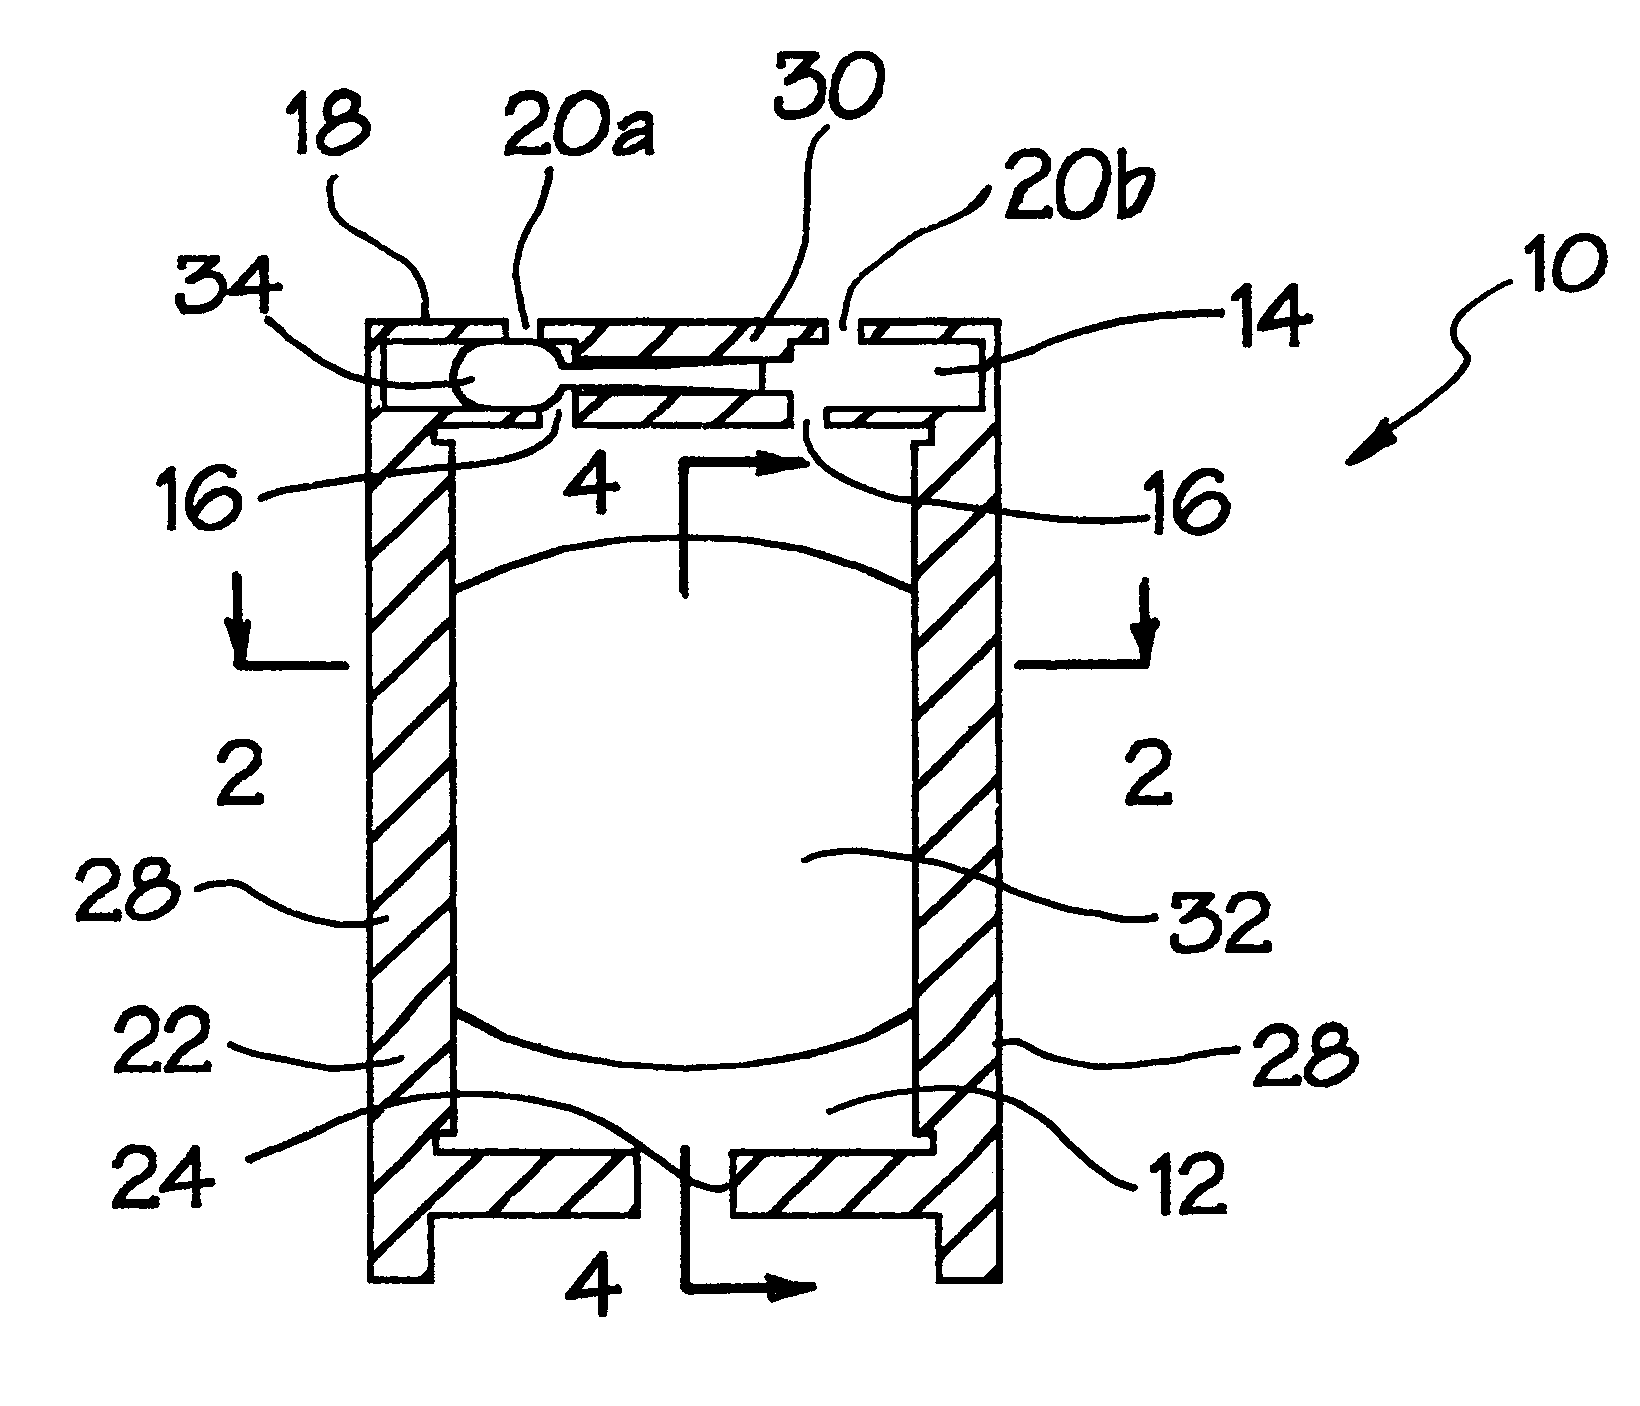 Micro-magnetohydrodynamic pump and method for operation of the same